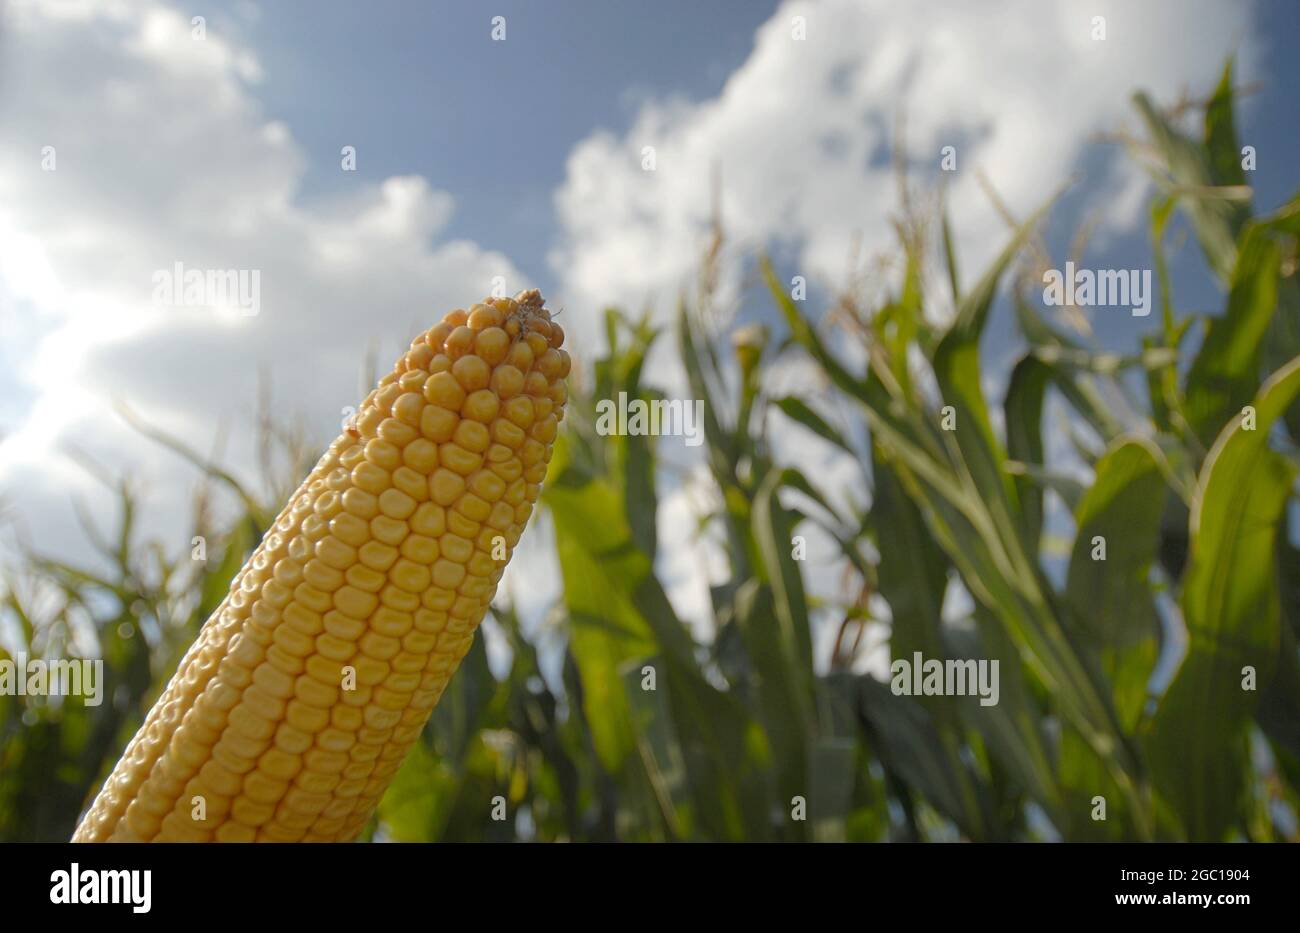 Indian corn, maize (Zea mays), maize-field in worm-eye view, maize-cob in the foreground, Germany Stock Photo